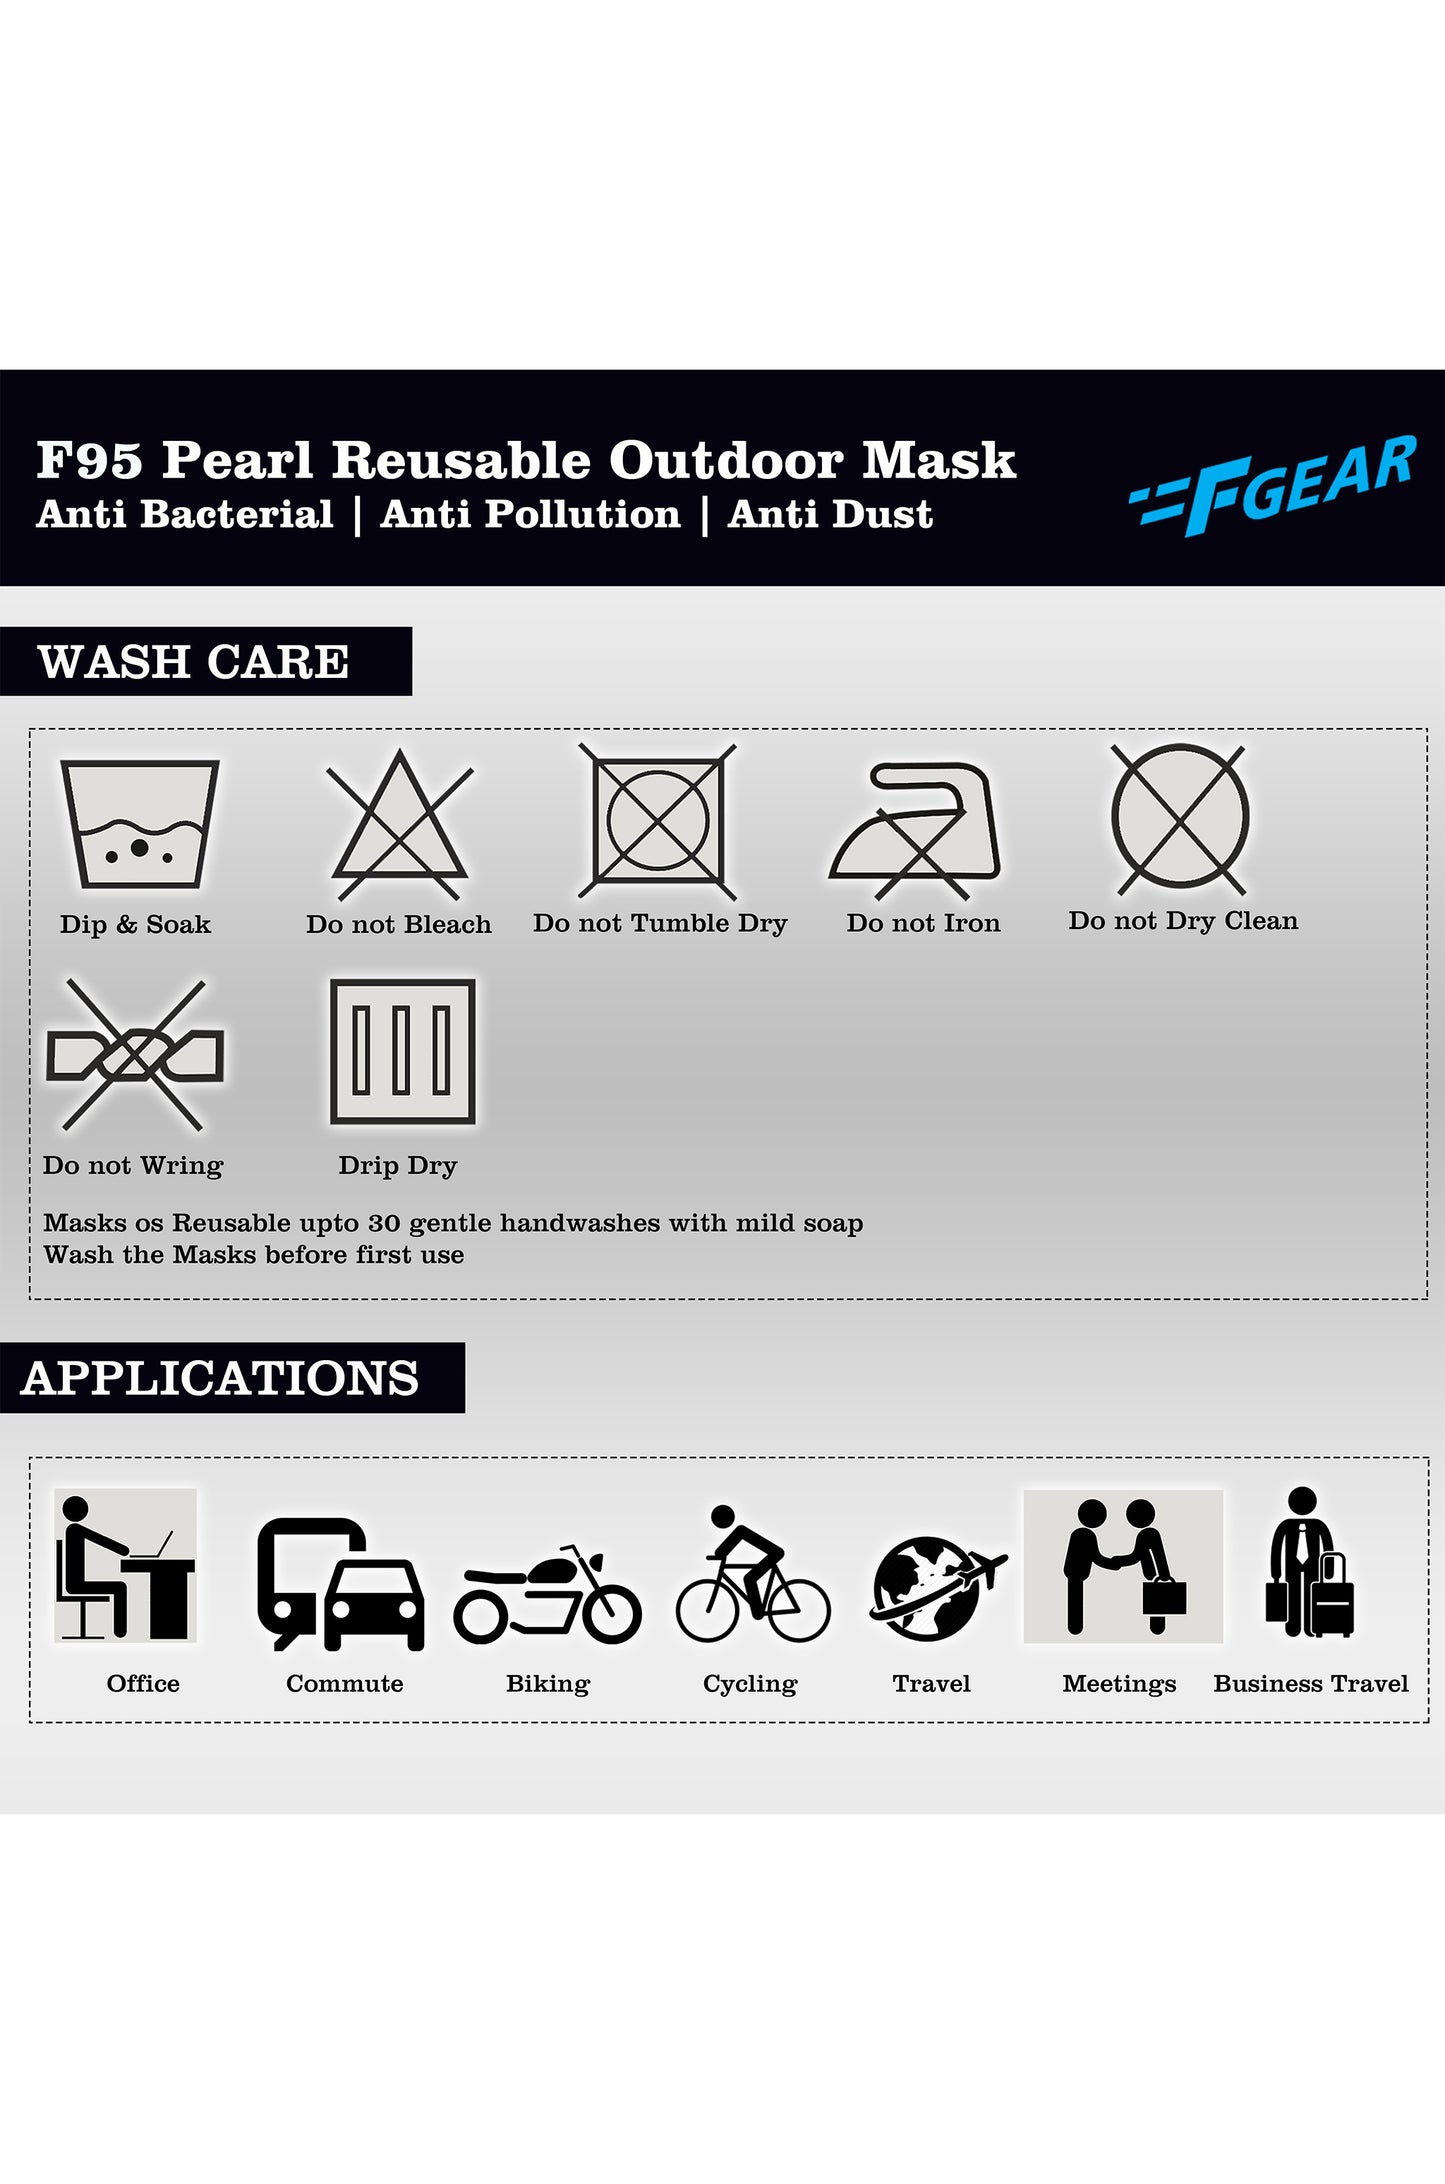 F Gear Pearl F95 Mask Black-Grey-White-F green-Navy Blue-Sea green 7 layer ISO CE SITRA lab certified >95% Bacteria Filtration PACK-6